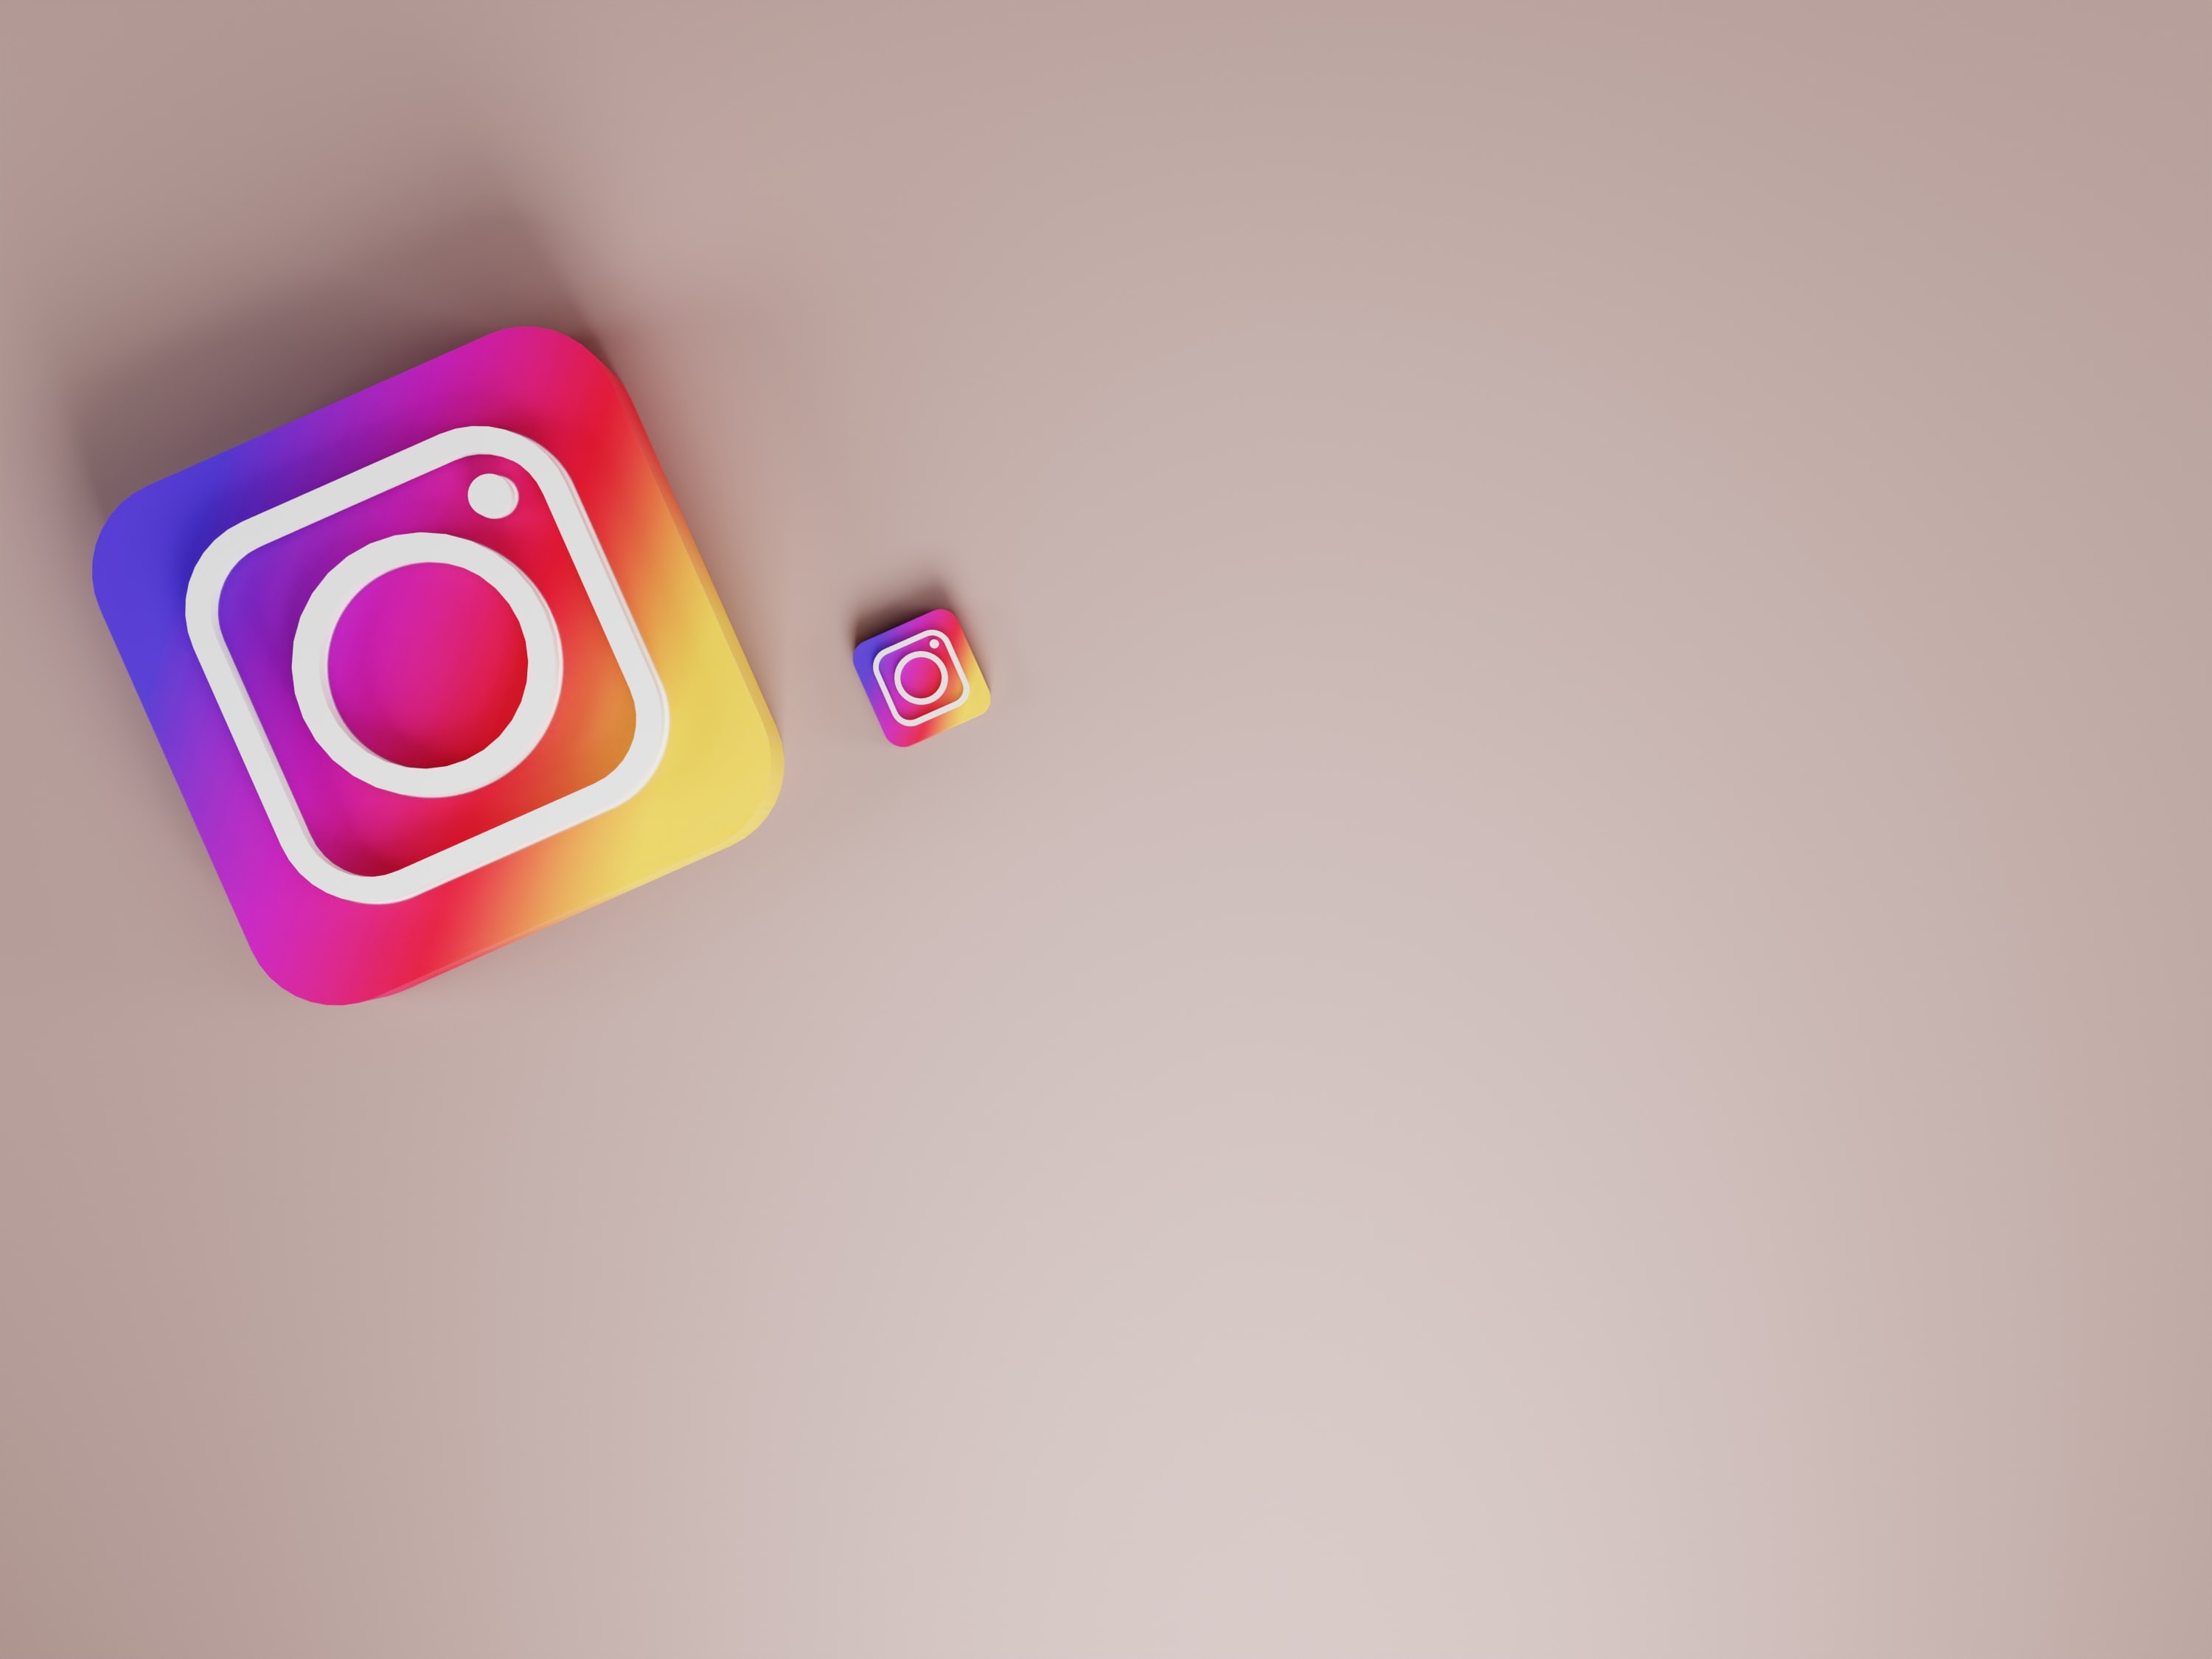 Instagram Marketing Trends To Follow for Your Small Business by Publer